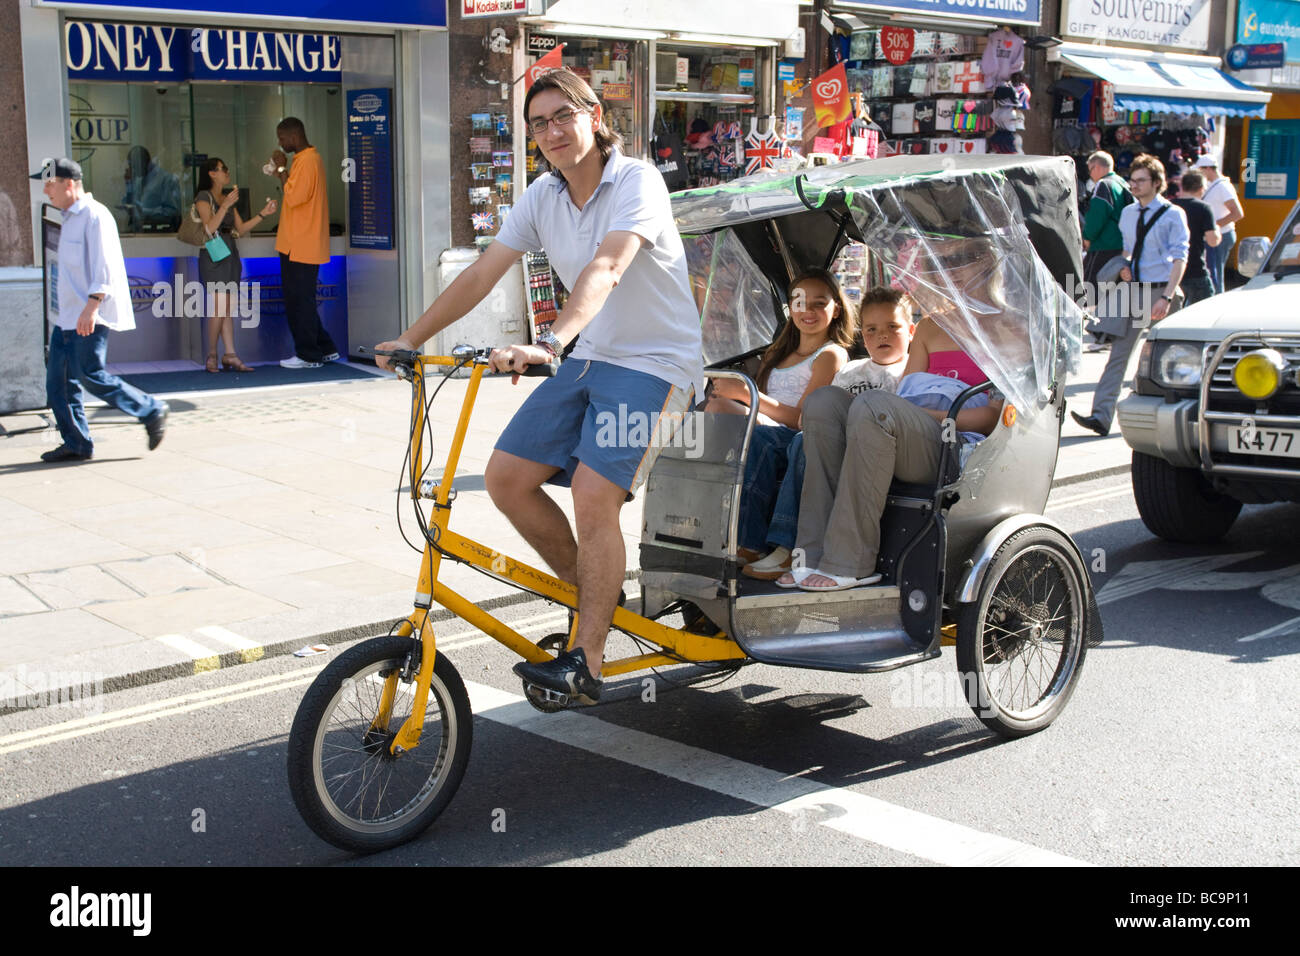 Tourists riding in a Rickshaw Central London Stock Photo